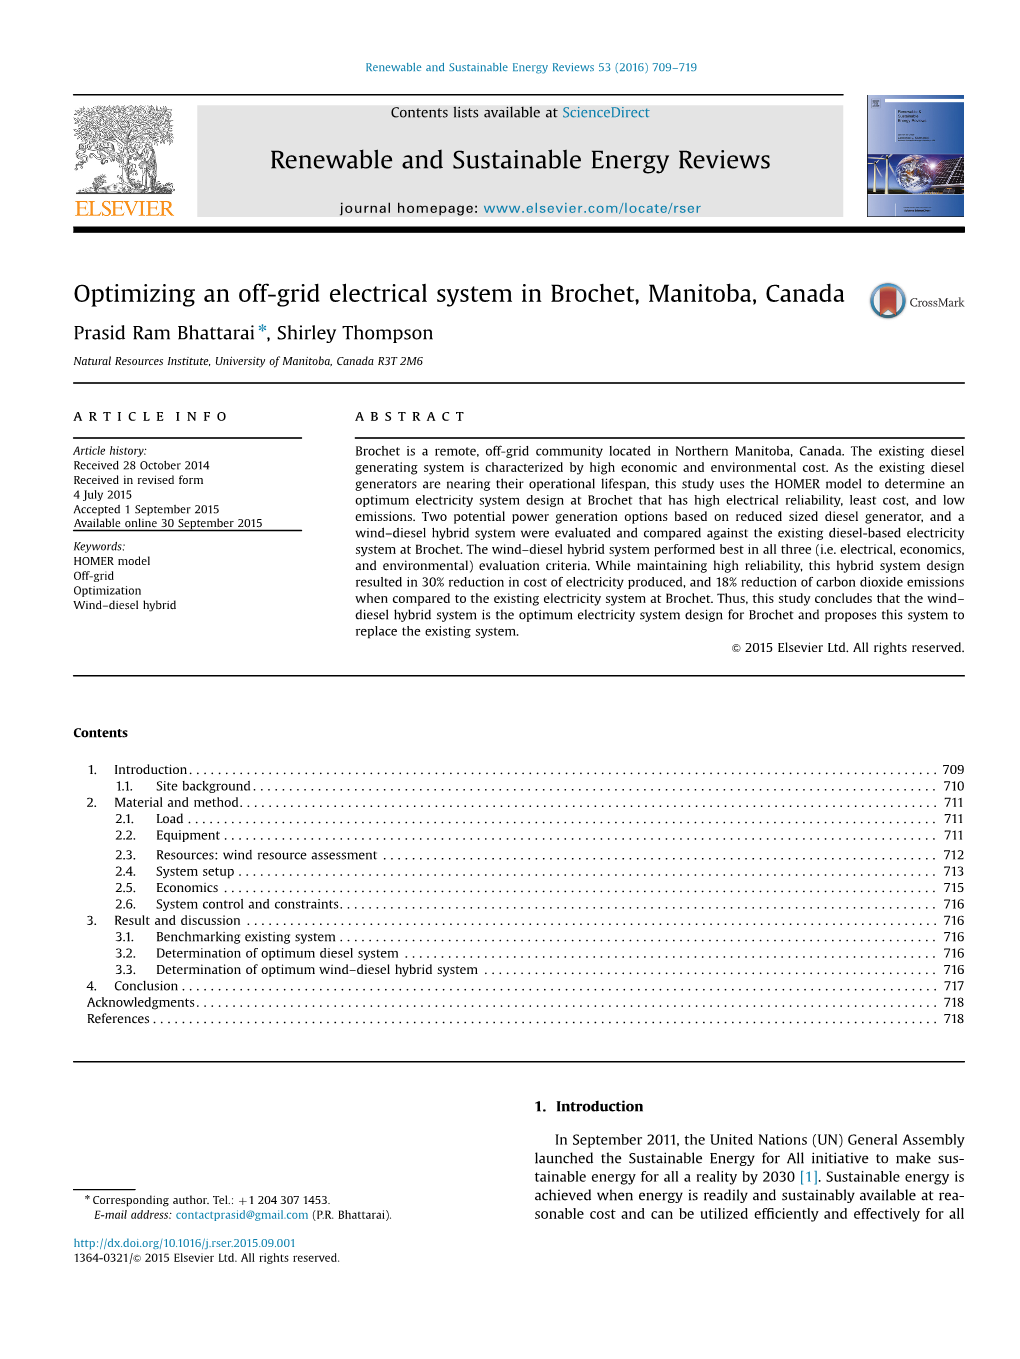 Optimizing an Off-Grid Electrical System in Brochet, Manitoba, Canada Renewable and Sustainable Energy Reviews